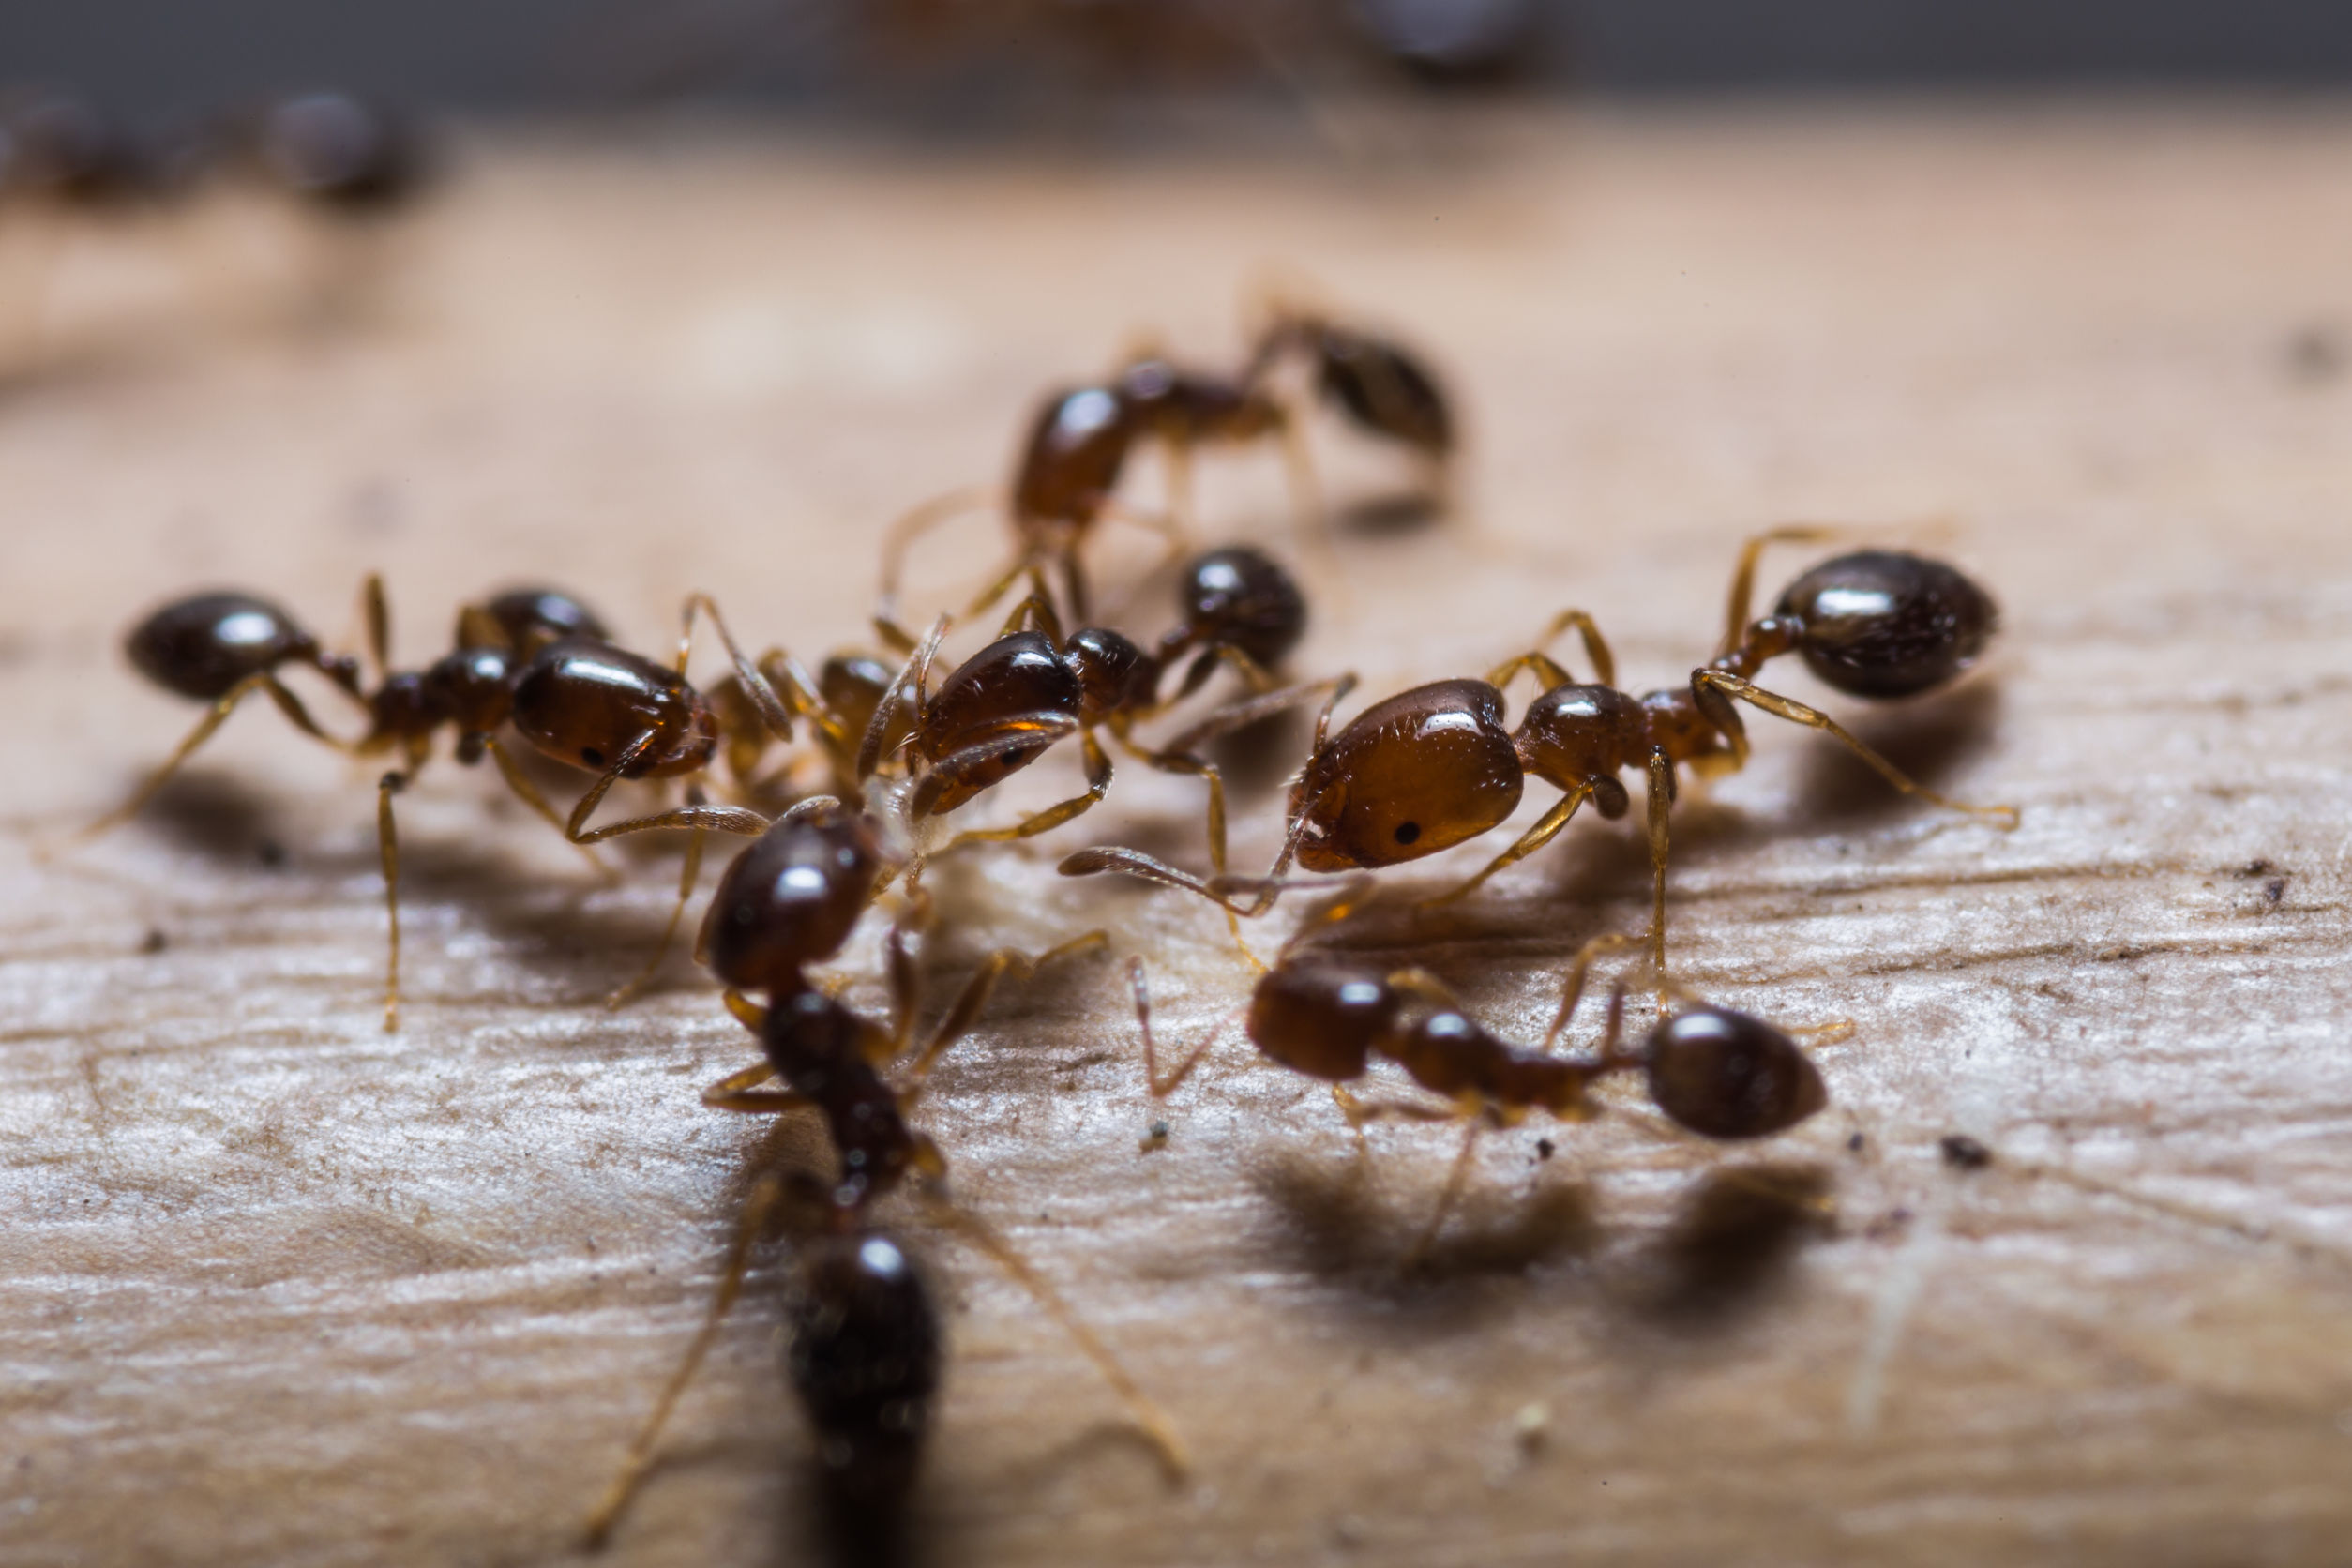 Do You See Ants In Your Kitchen? Get In Touch With Us For Ant Control Services